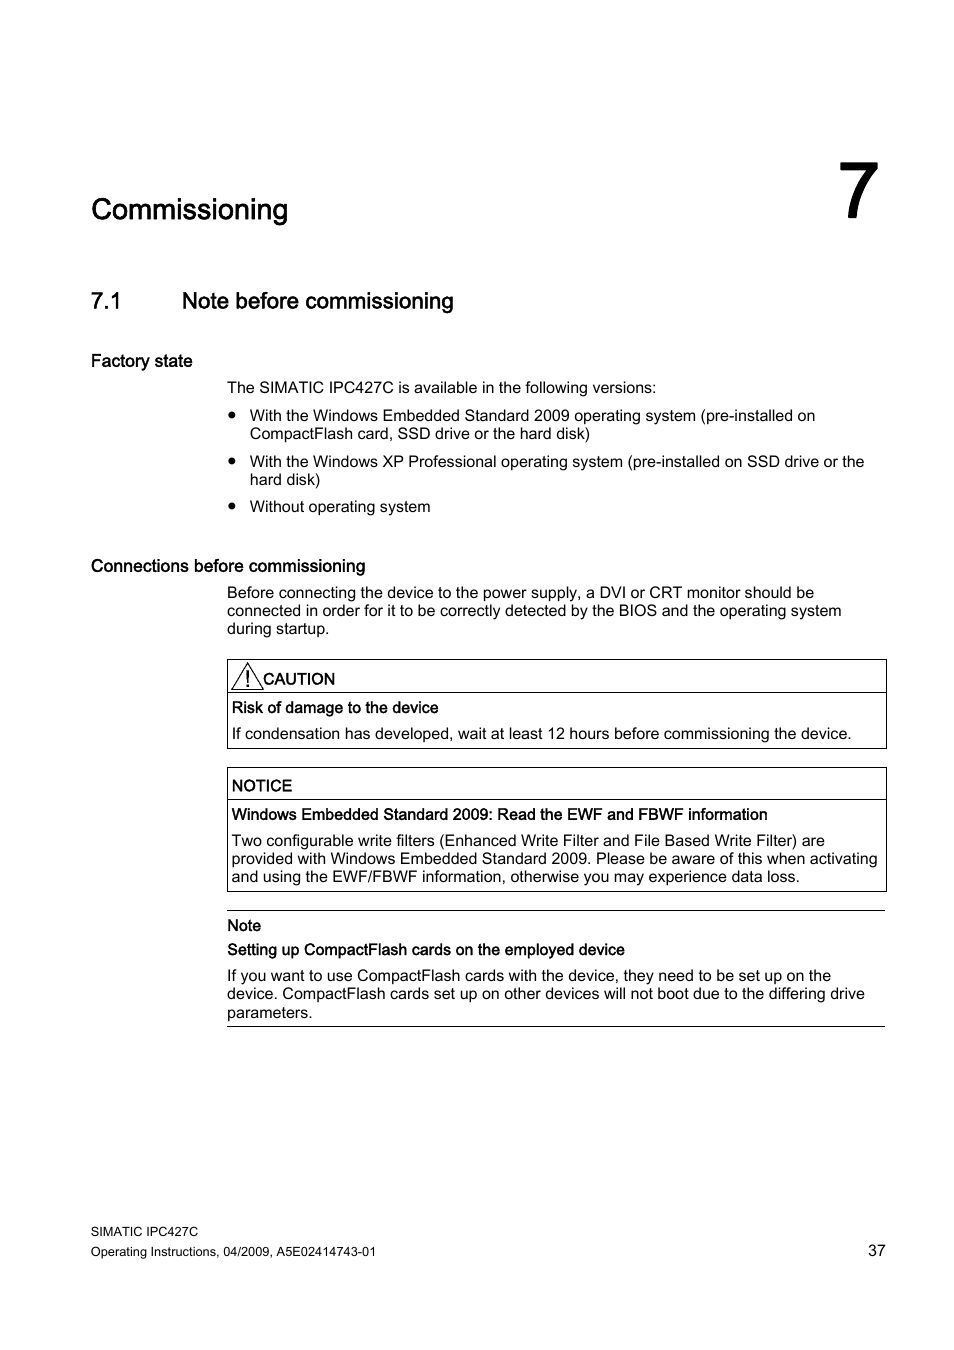 7 commissioning, 1 note before commissioning, Commissioning | Siemens Simatic Industrial PC IPC427C User Manual | Page 37 / 170